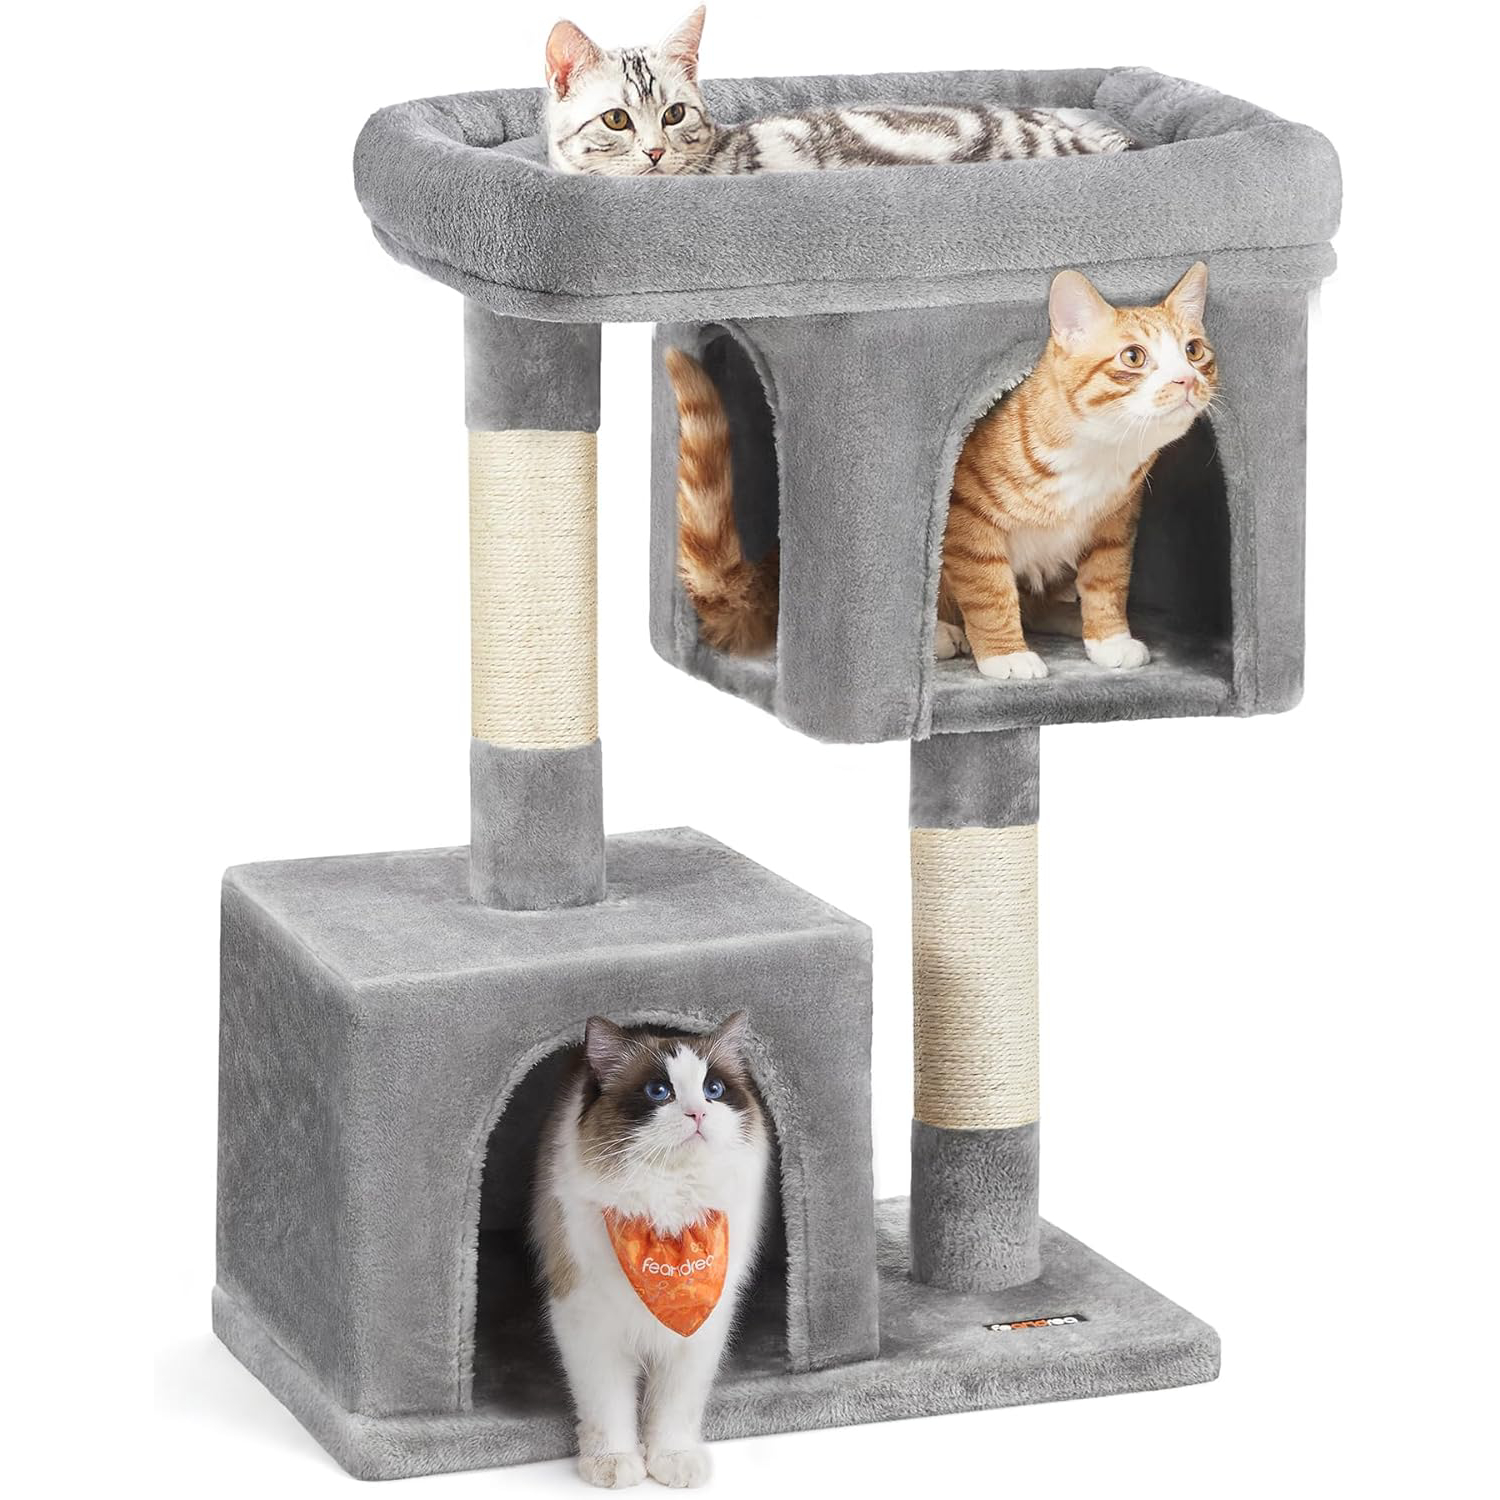 Feandrea Cat Tree, 33.1-Inch Cat Tower, L, Cat Condo for Large Cats up to 16 lb, Large Cat Perch, 2 Cat Caves, Scratching Post, Light Gray UPCT61W New